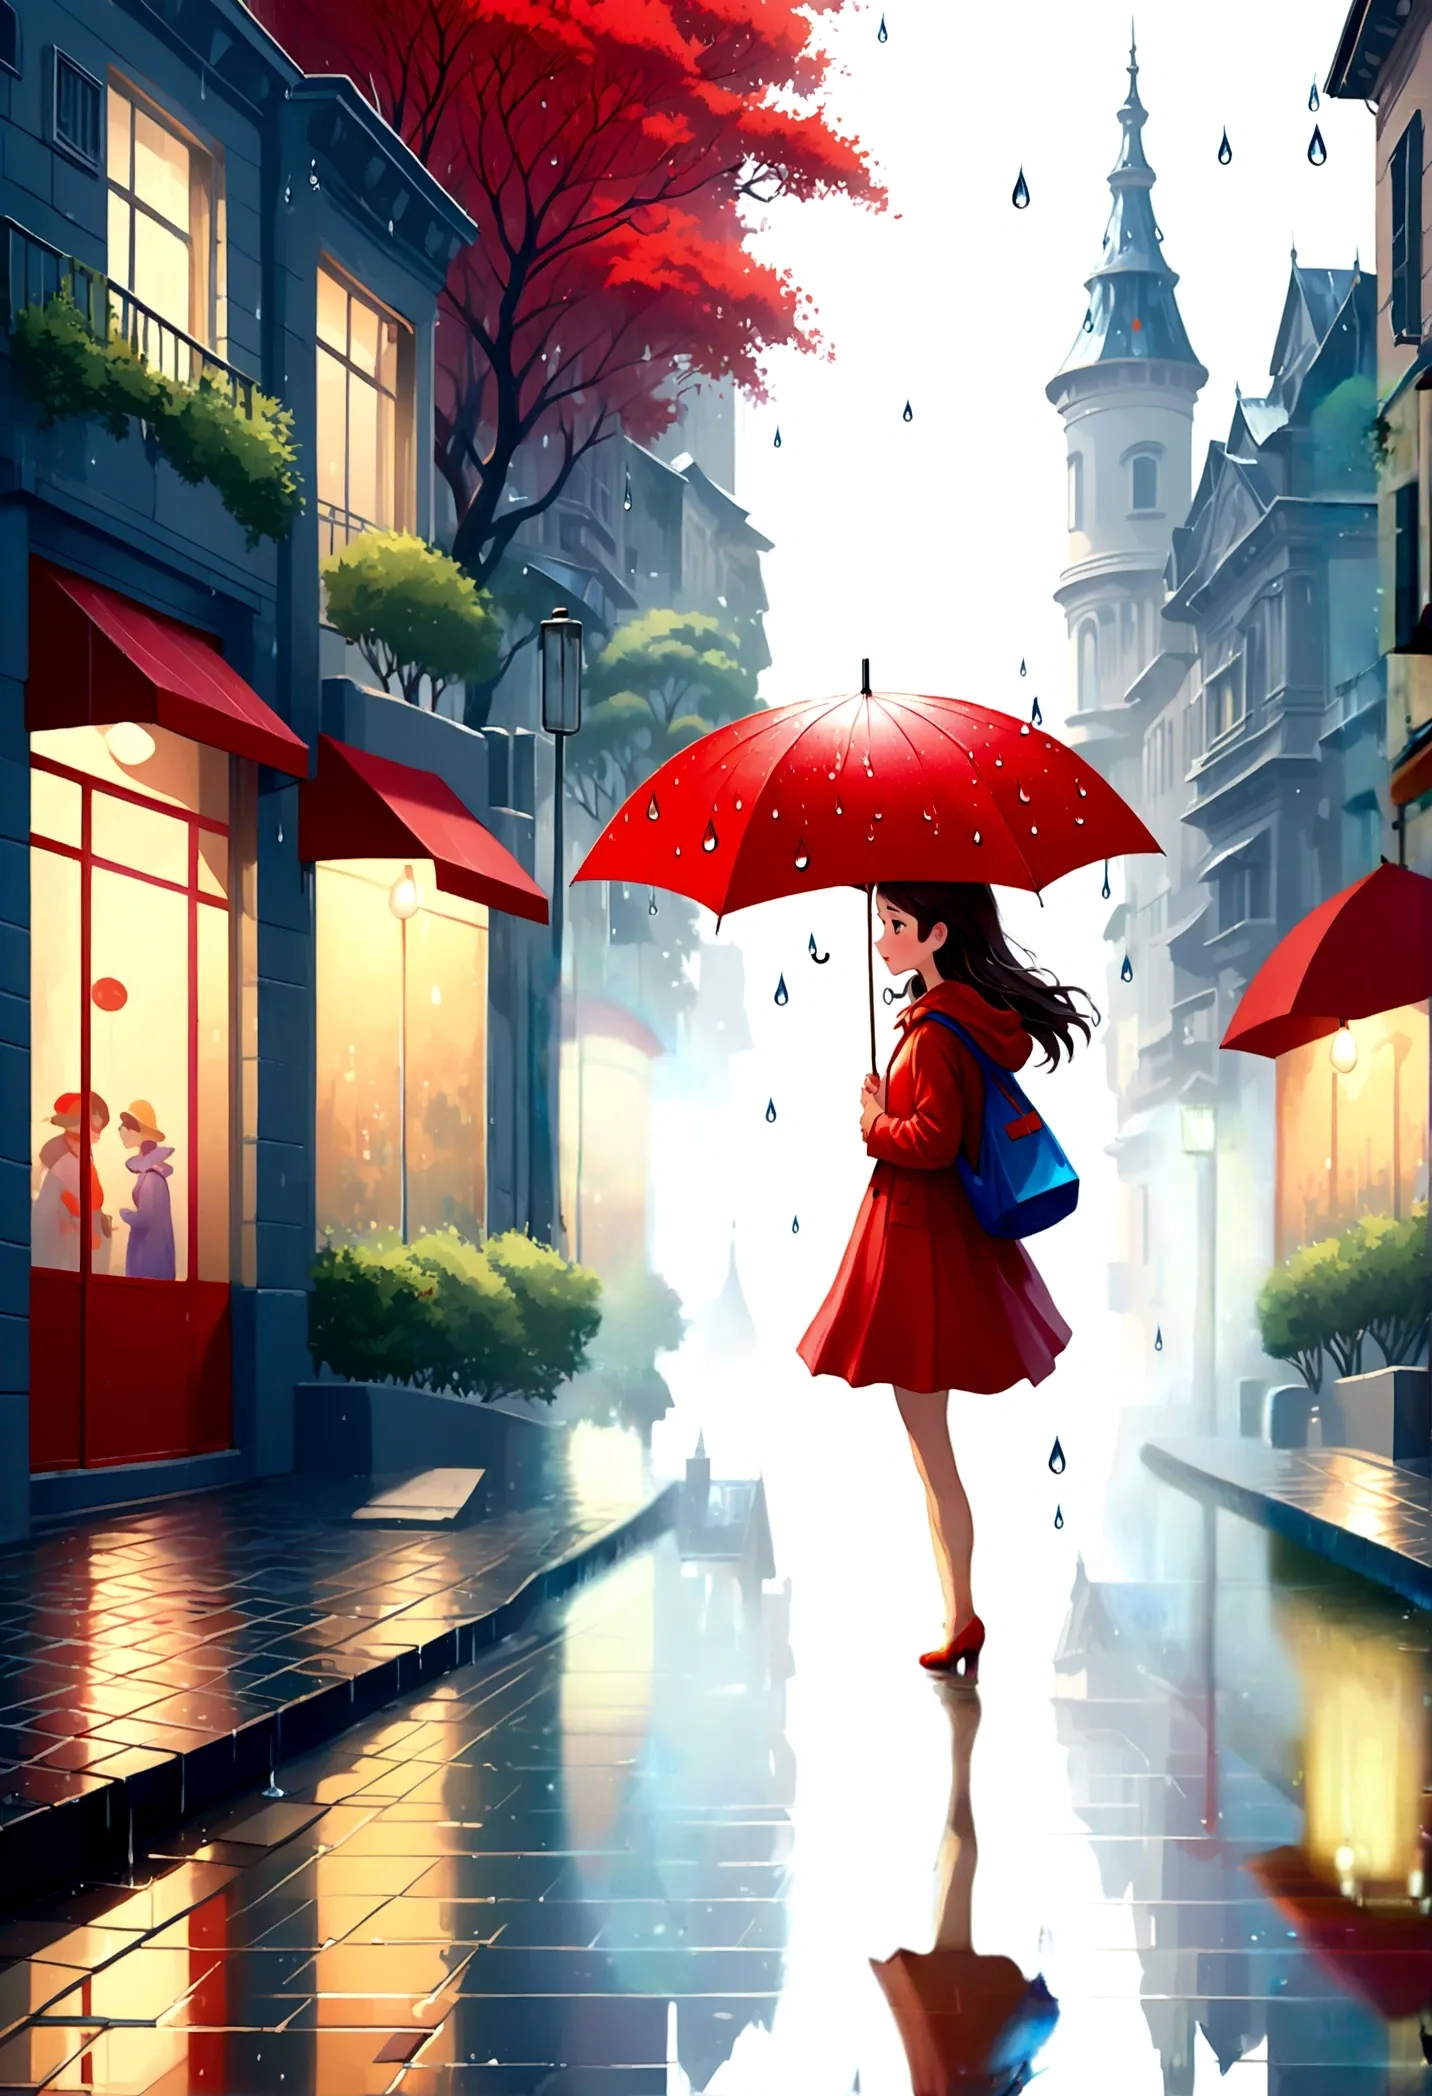 Fixes,,Cute illustration: Landscape,Street corner on a rainy day,A landscape that looks like an illustration from a picture book...